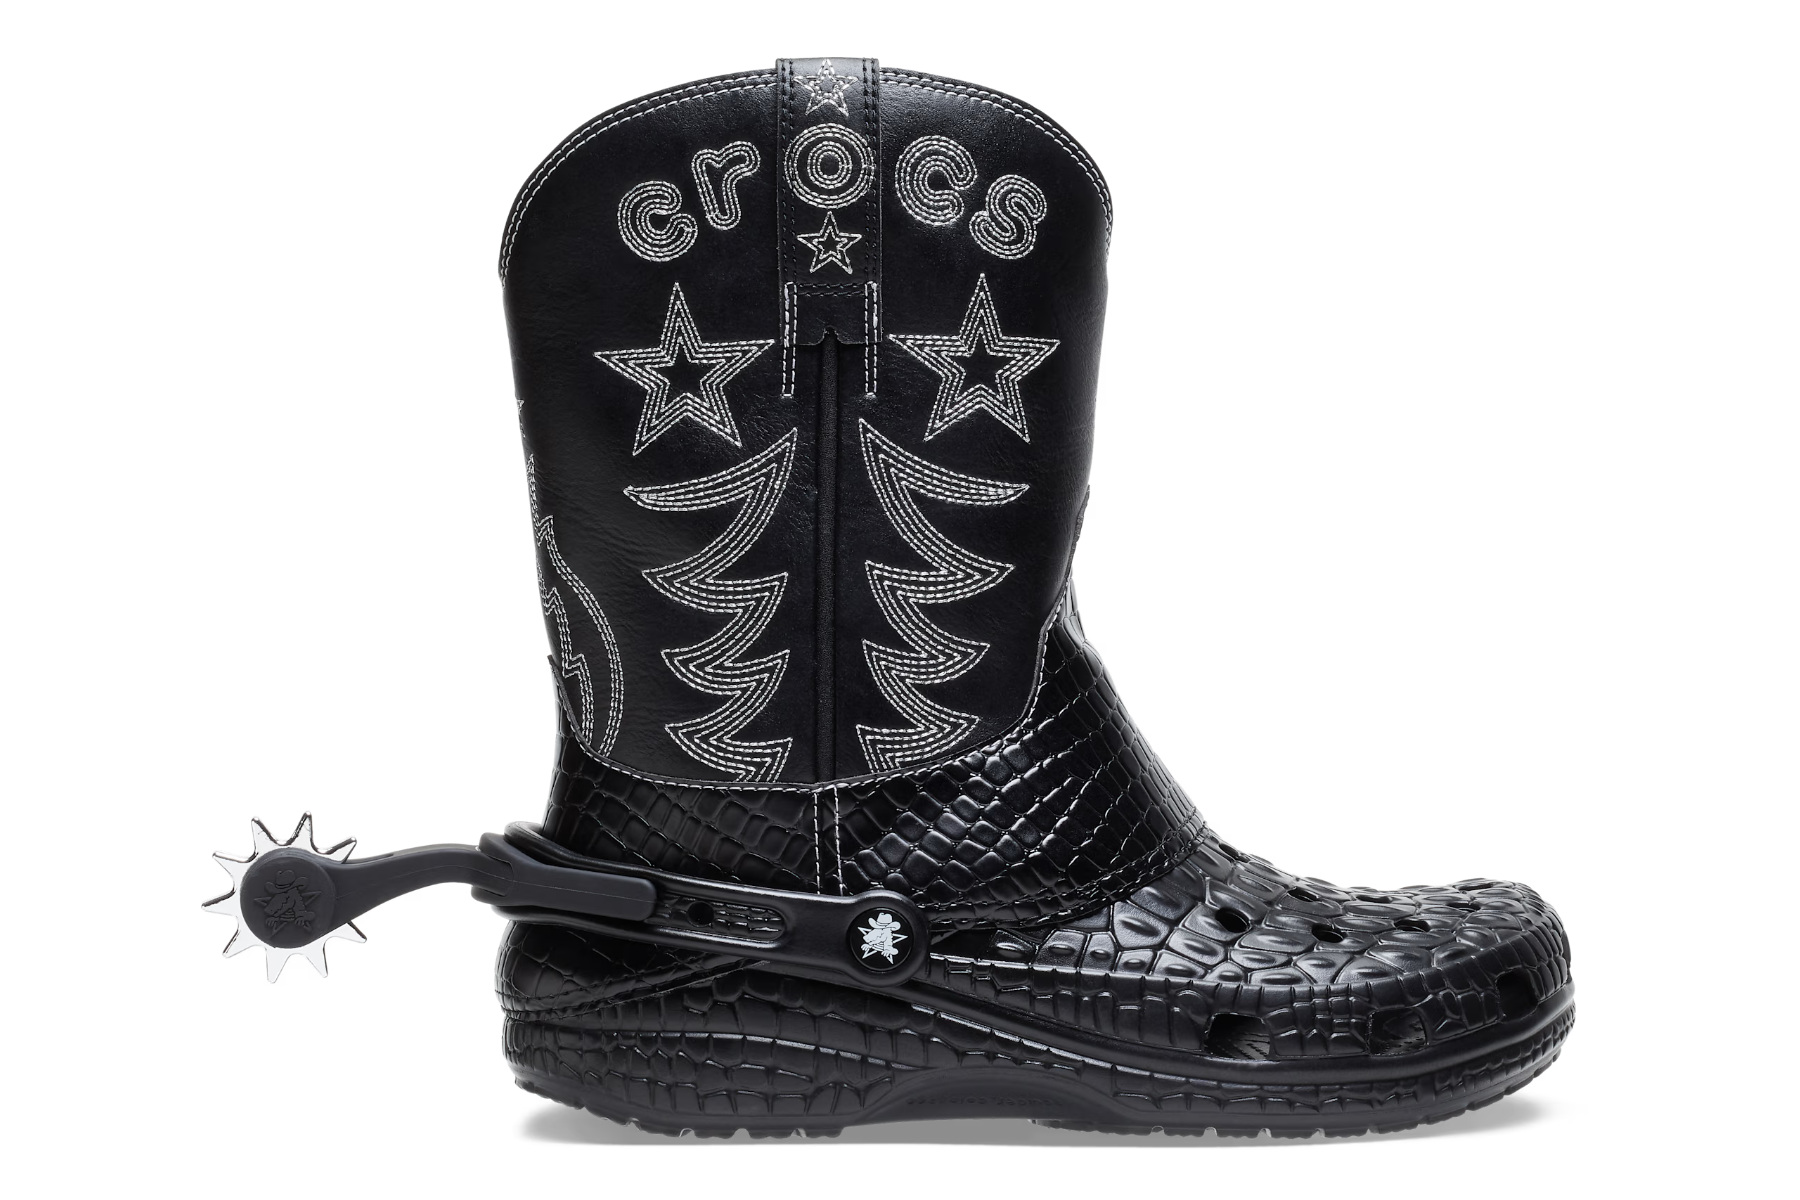 Crocs has released a pair of Classic Cowboy Boots for Fall/Winter 2023.